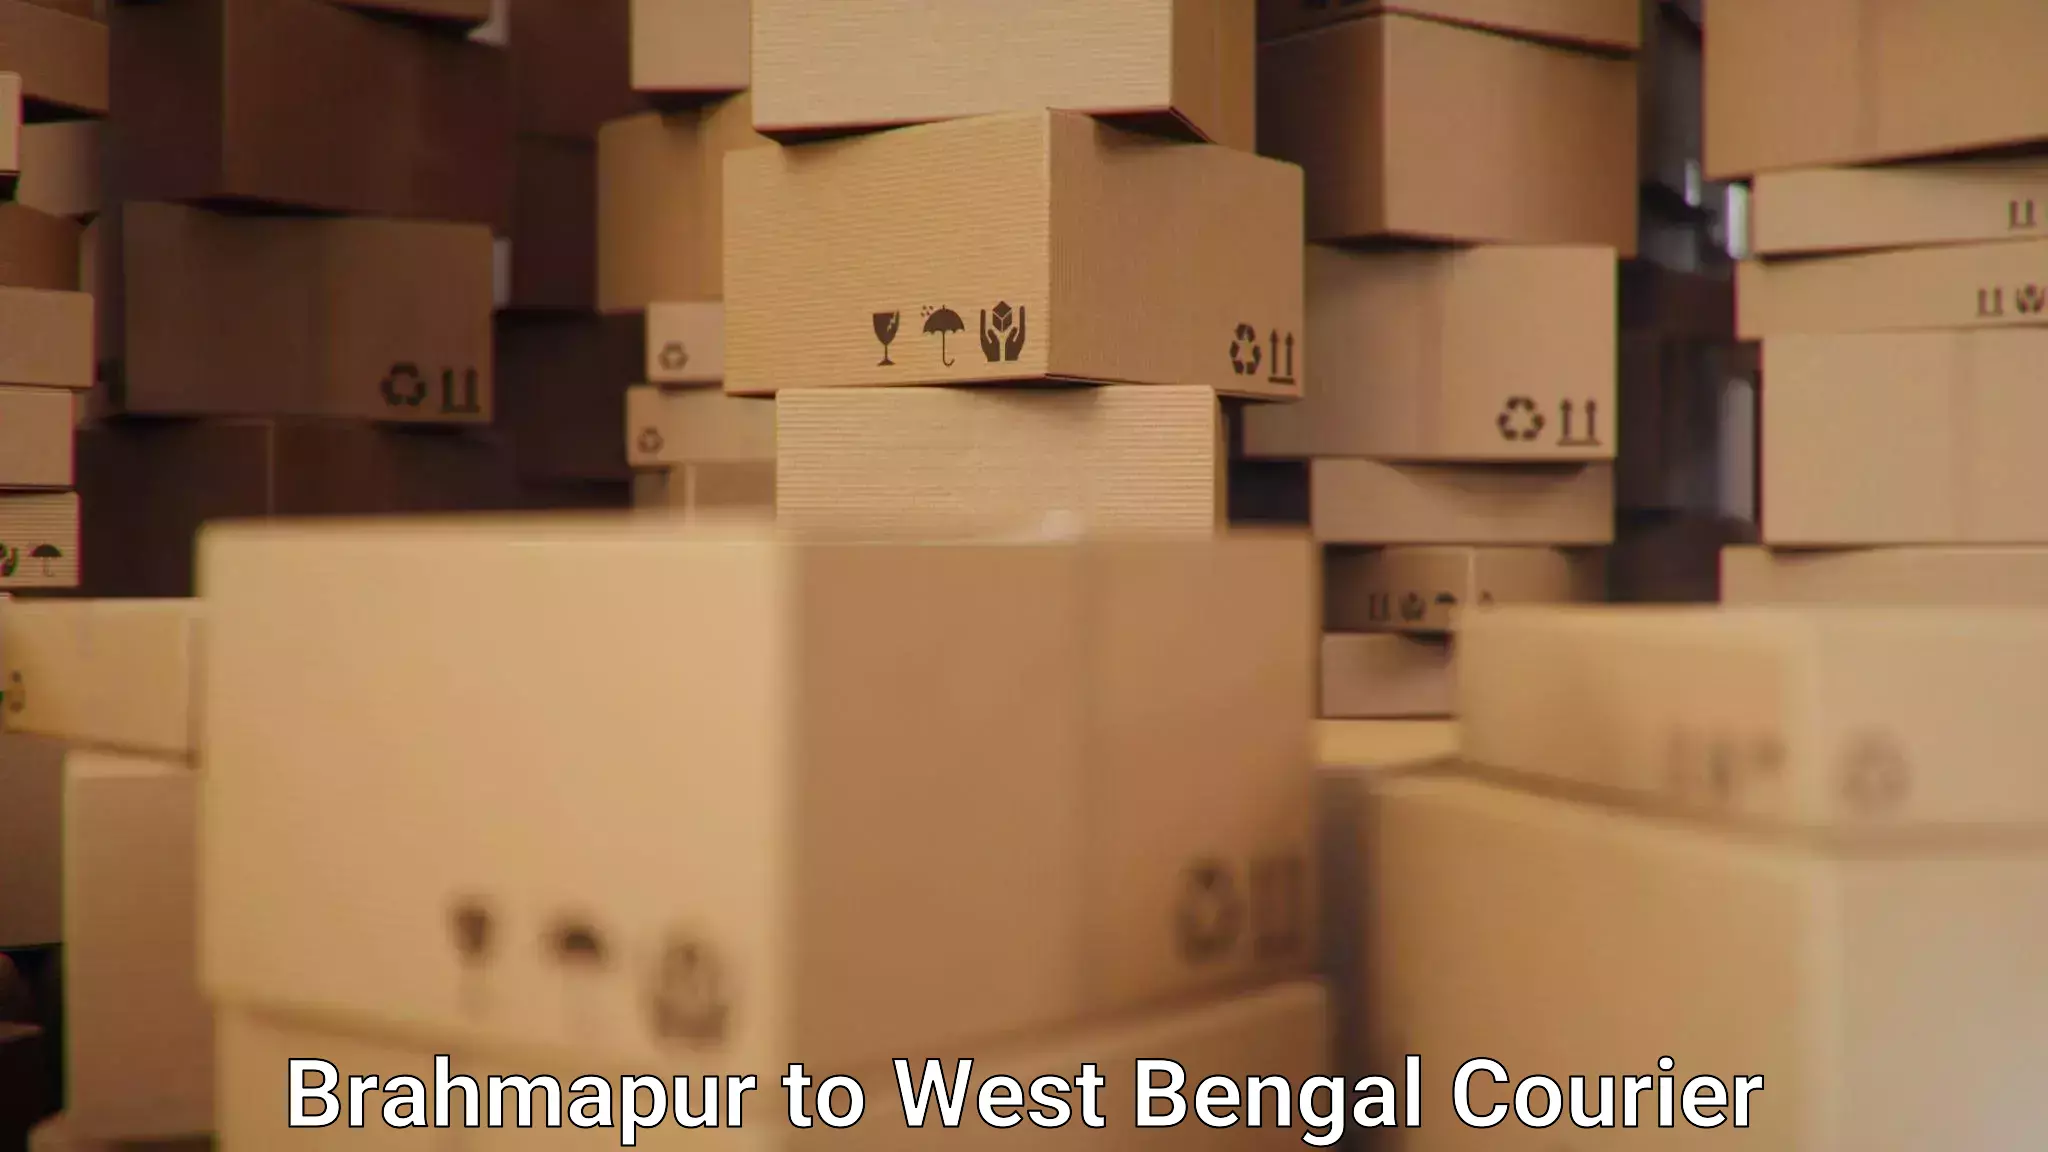 State-of-the-art courier technology Brahmapur to Algarah